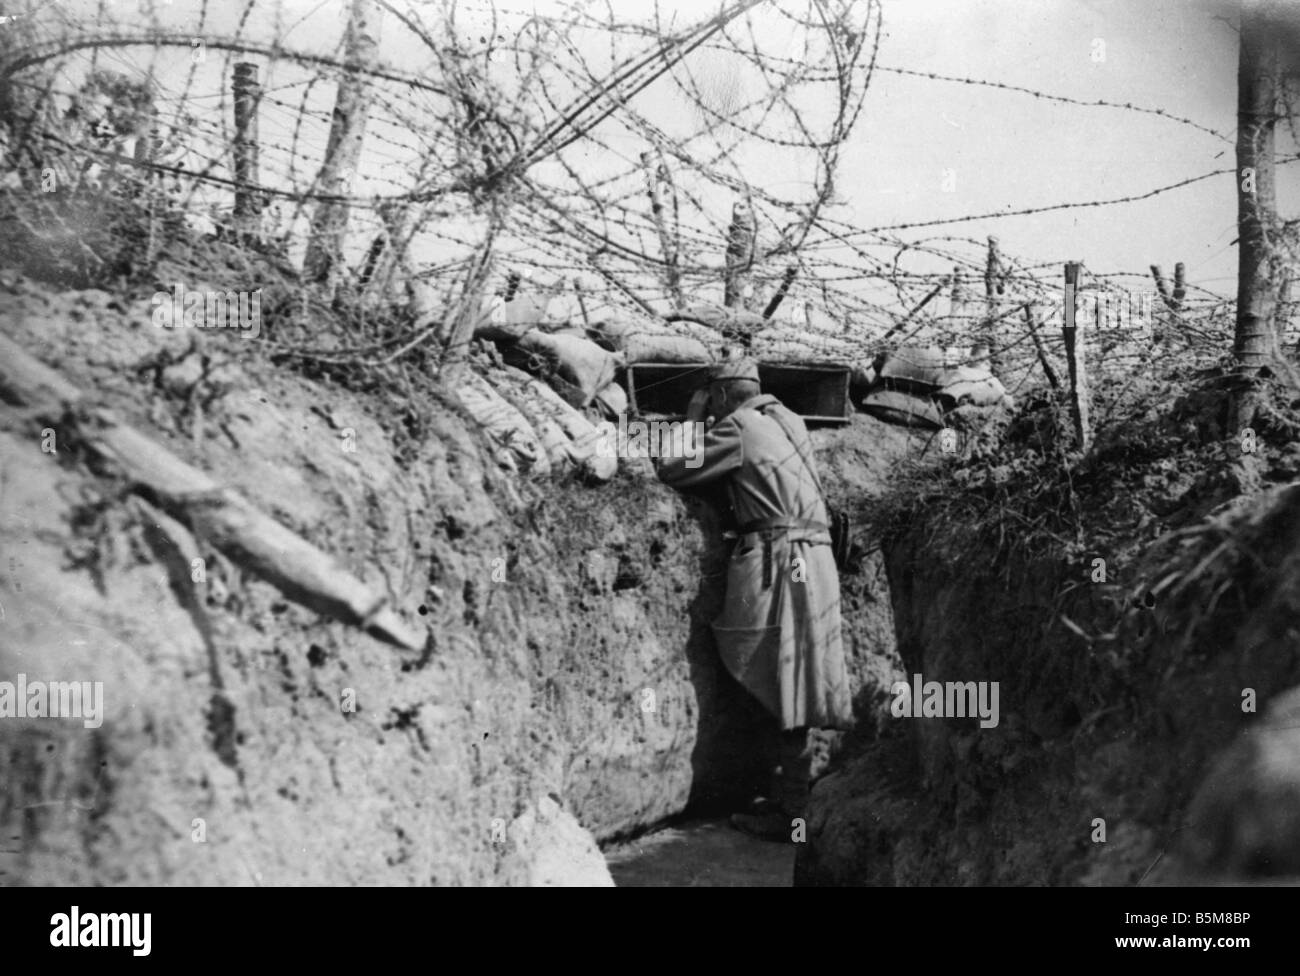 2 G55 F1 1916 10 Trench with barbed wire World War I History World War I France Trench warfare French trenches with barbed wire Stock Photo